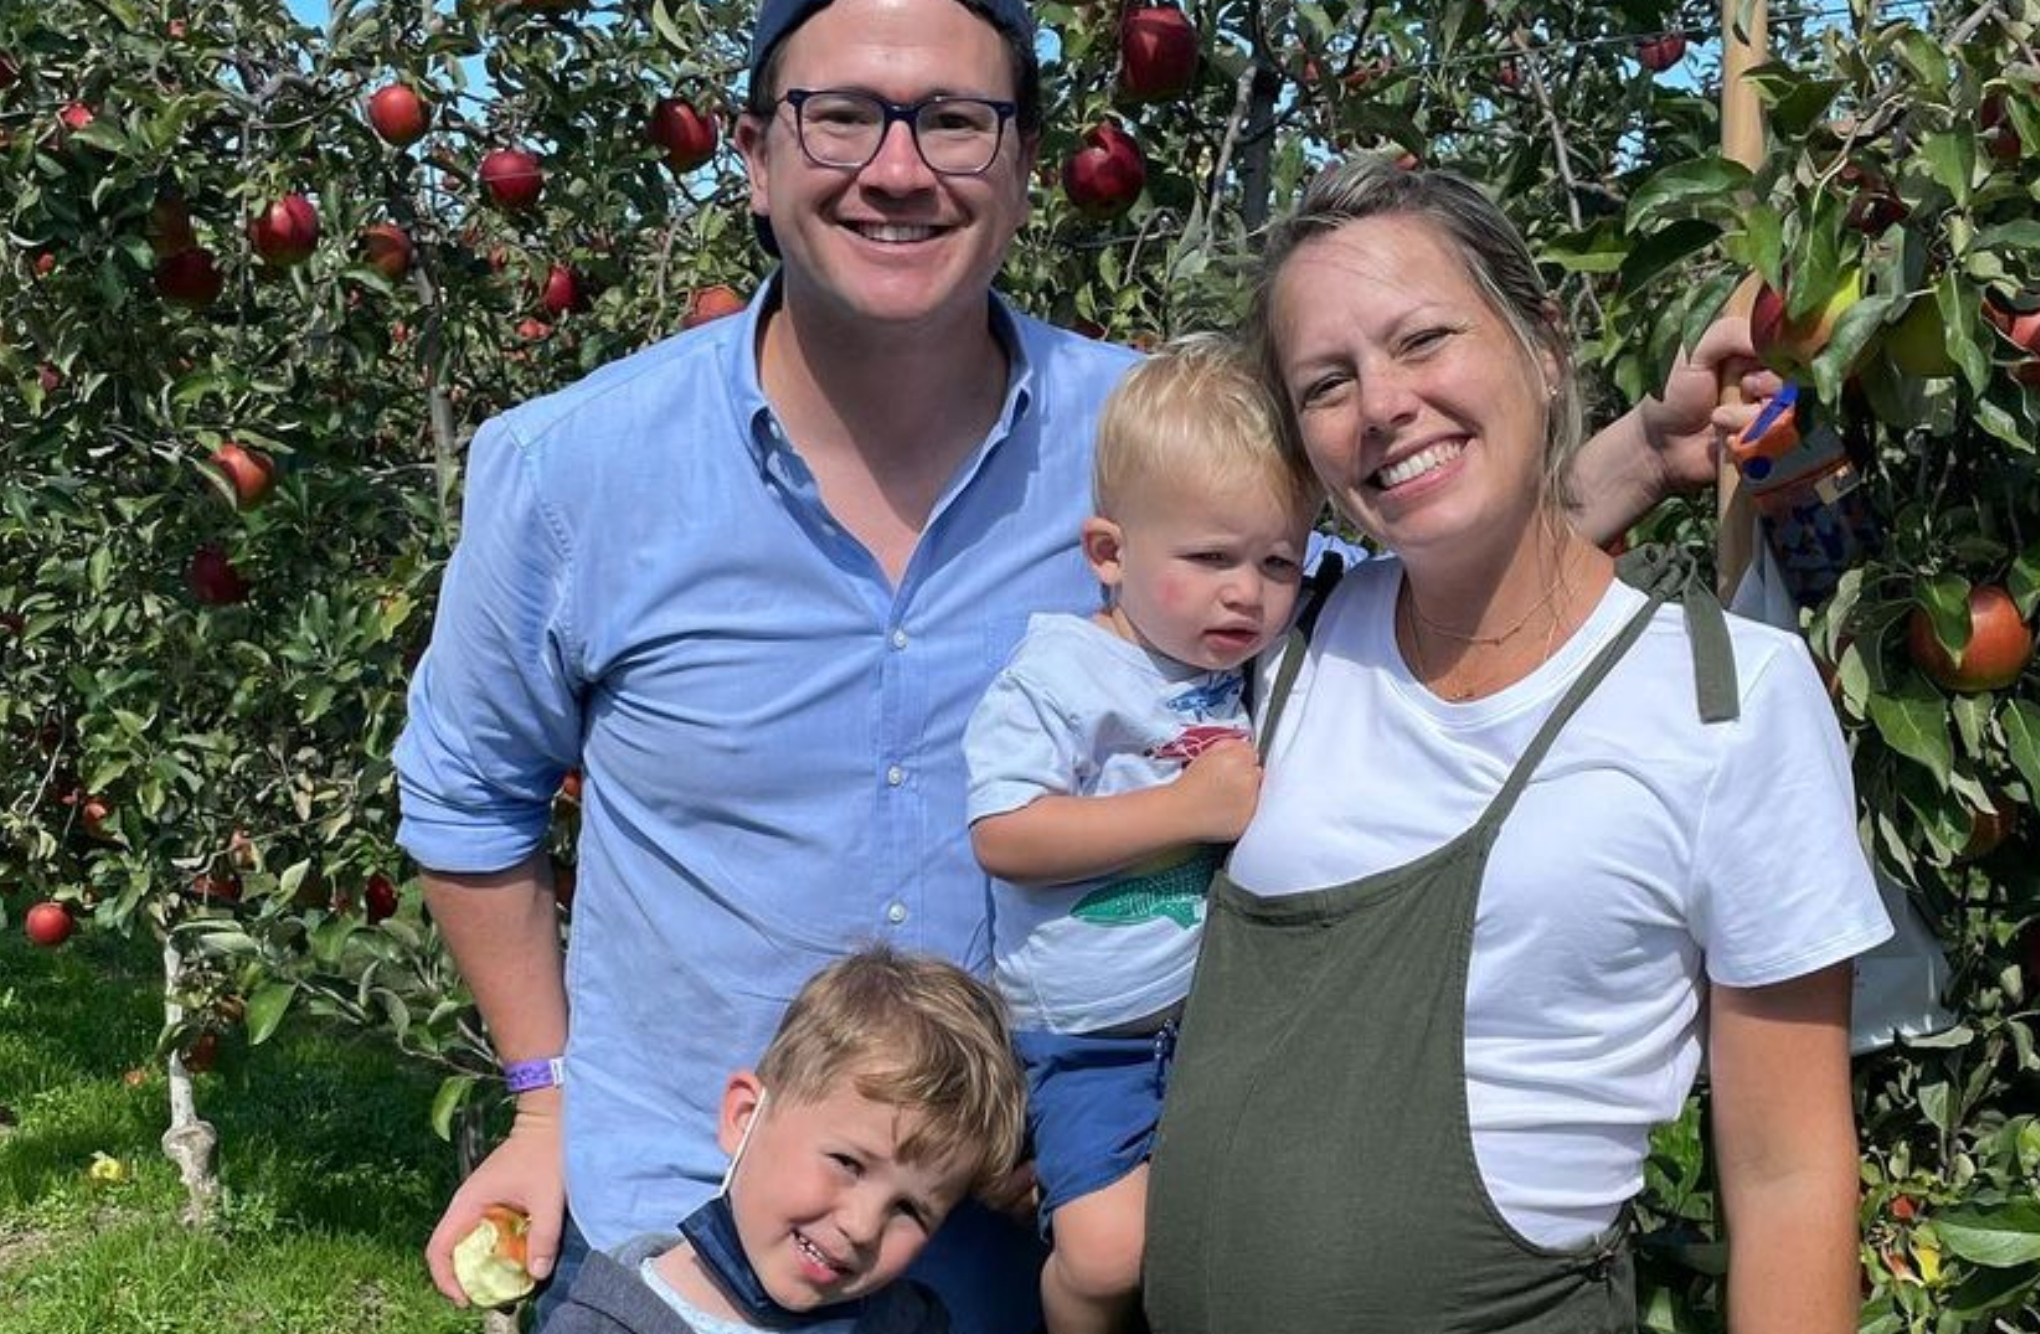 Dylan Dreyer Explains Why She Prefers a ‘Tough Love’ Approach to Raising Her Children | Dylan Dreyer, a meteorologist for TODAY, grew up in a household that featured a lot of ‘tough love’ from her parents -- a parenting style she's now duplicating.